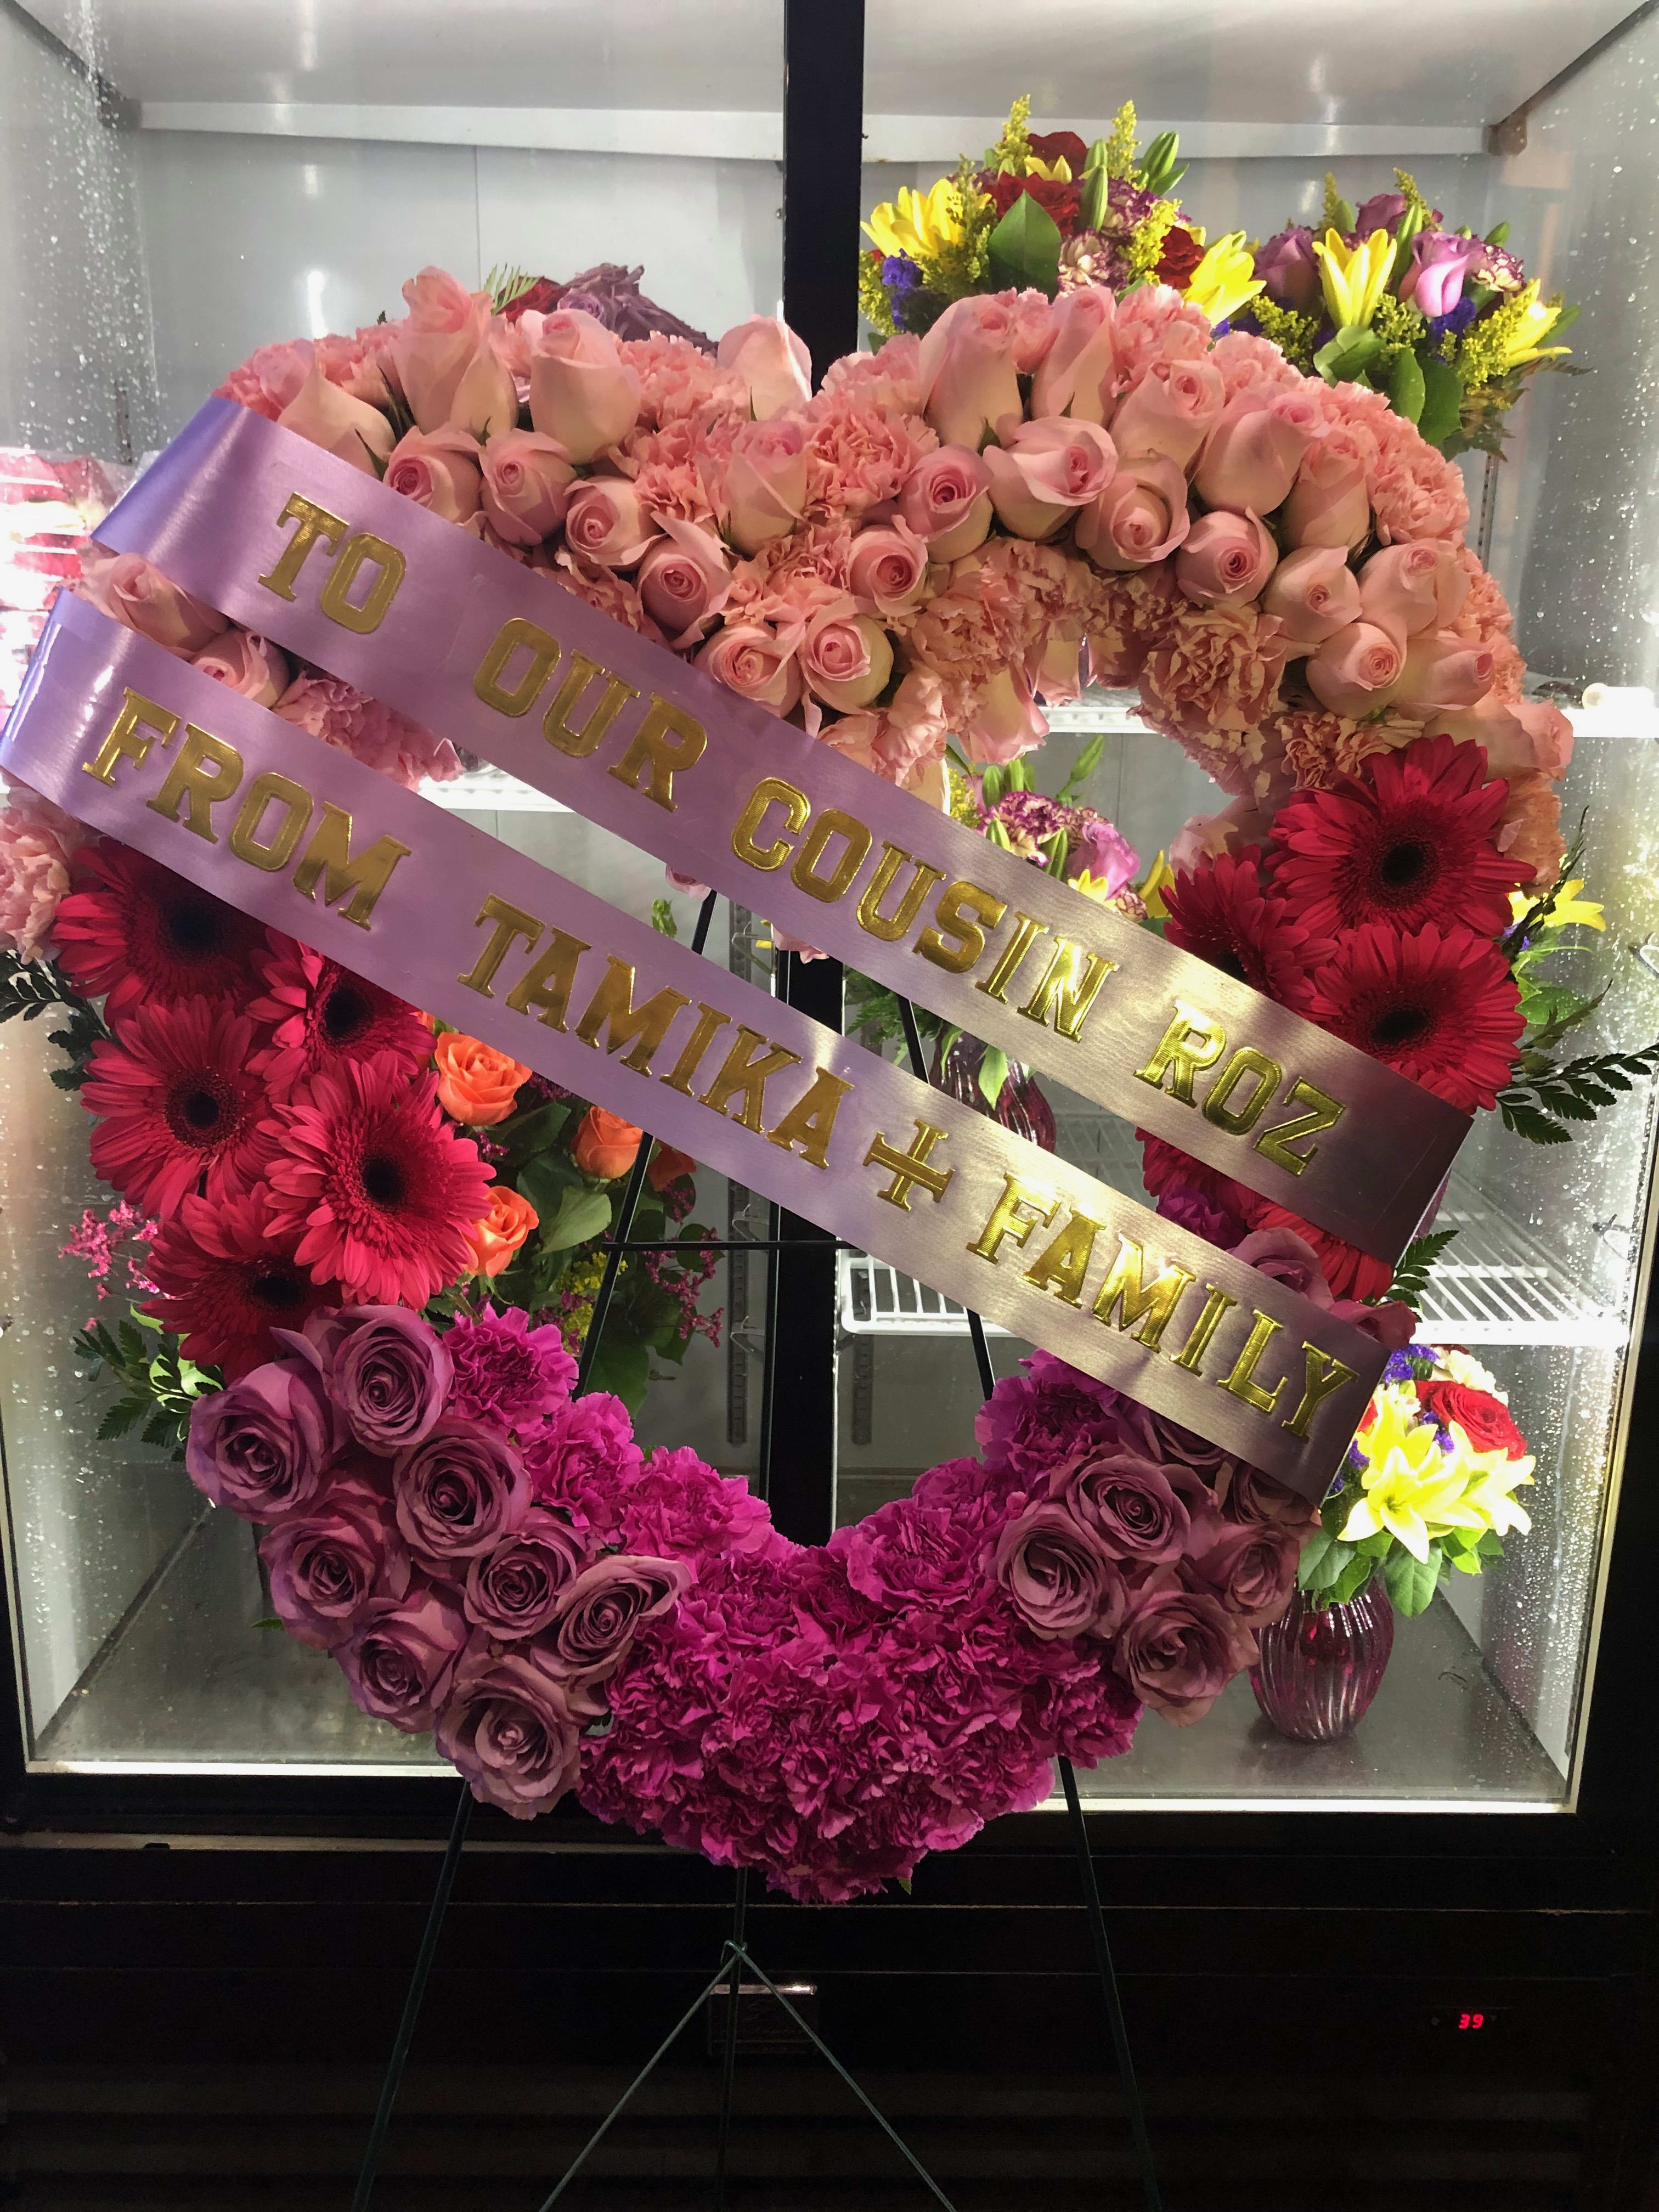 4 F, delux heart shaped sympathy wreath in Philadelphia, PA | Logan Floral  Designs and Gifts